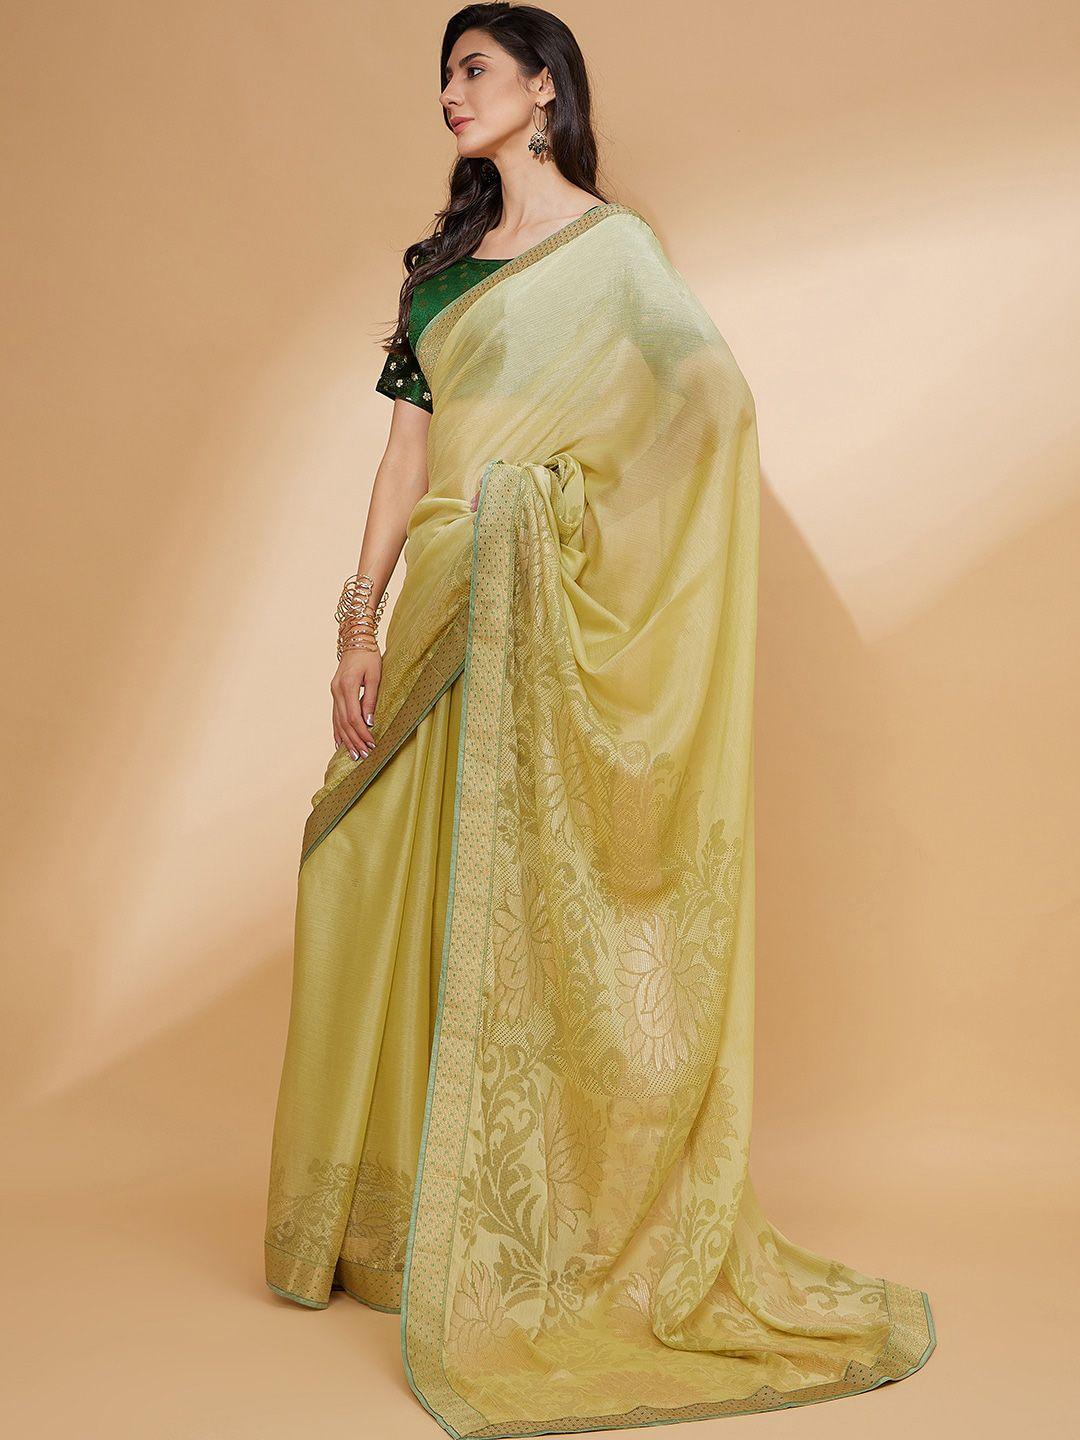 all about you floral woven design pure chiffon saree